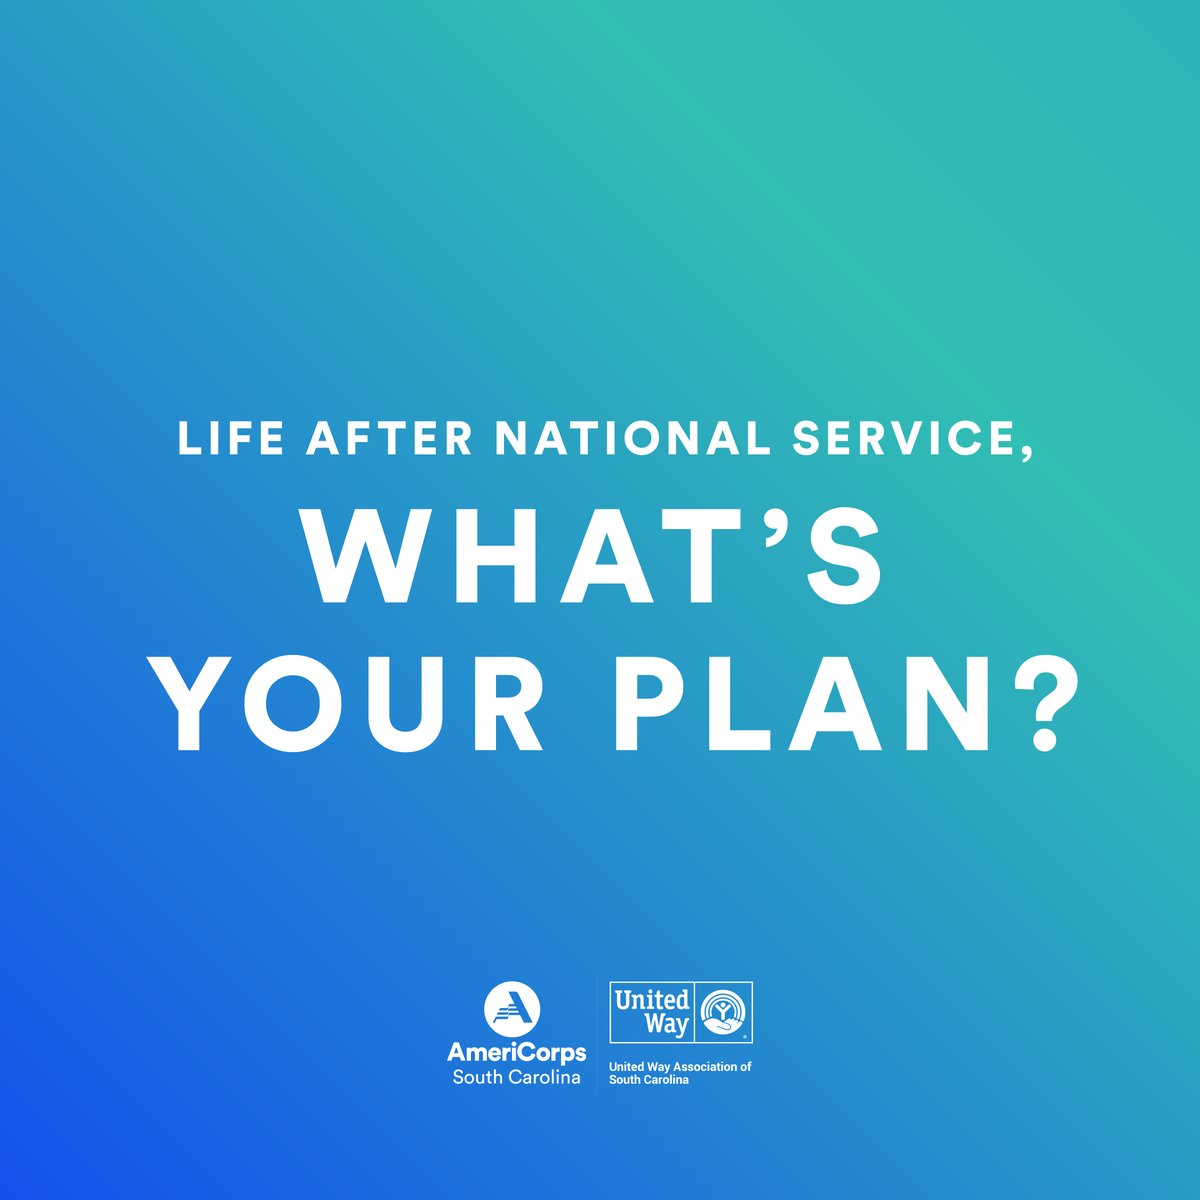 Life after National Service is full of endless possibilities! With connections to AmeriCorps Alumni worldwide, you can network, build relationships, and pave your path. The options are truly limitless.